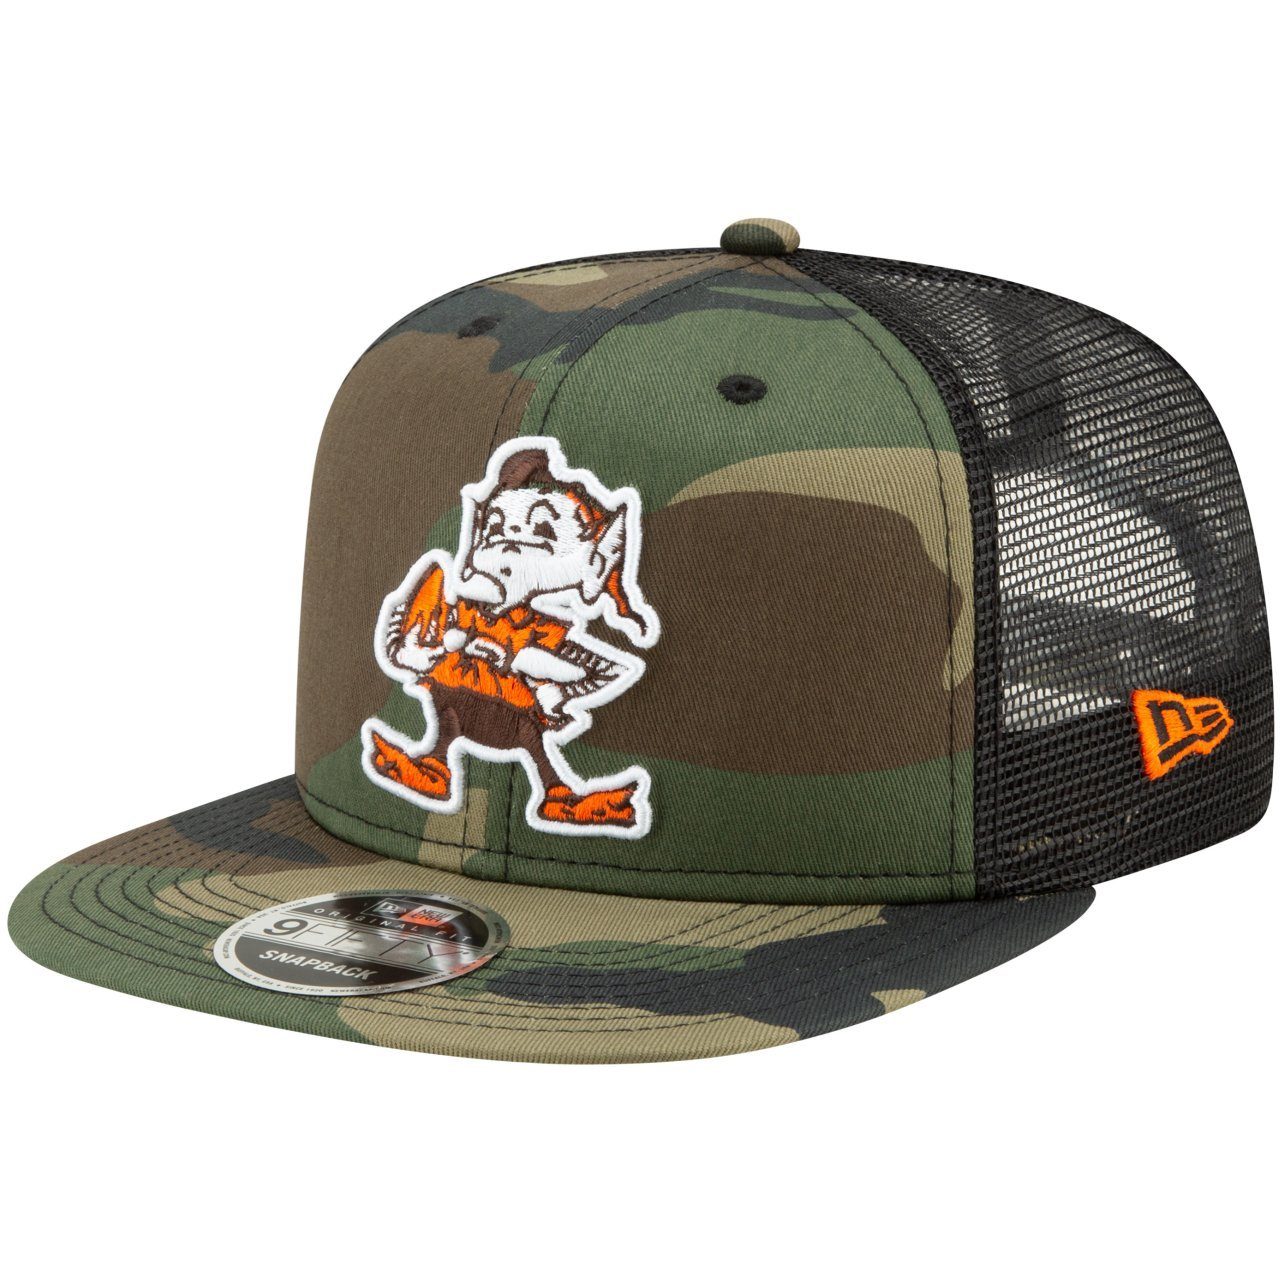 Era Throwback 9Fifty Browns Snapback Cap New Cleveland